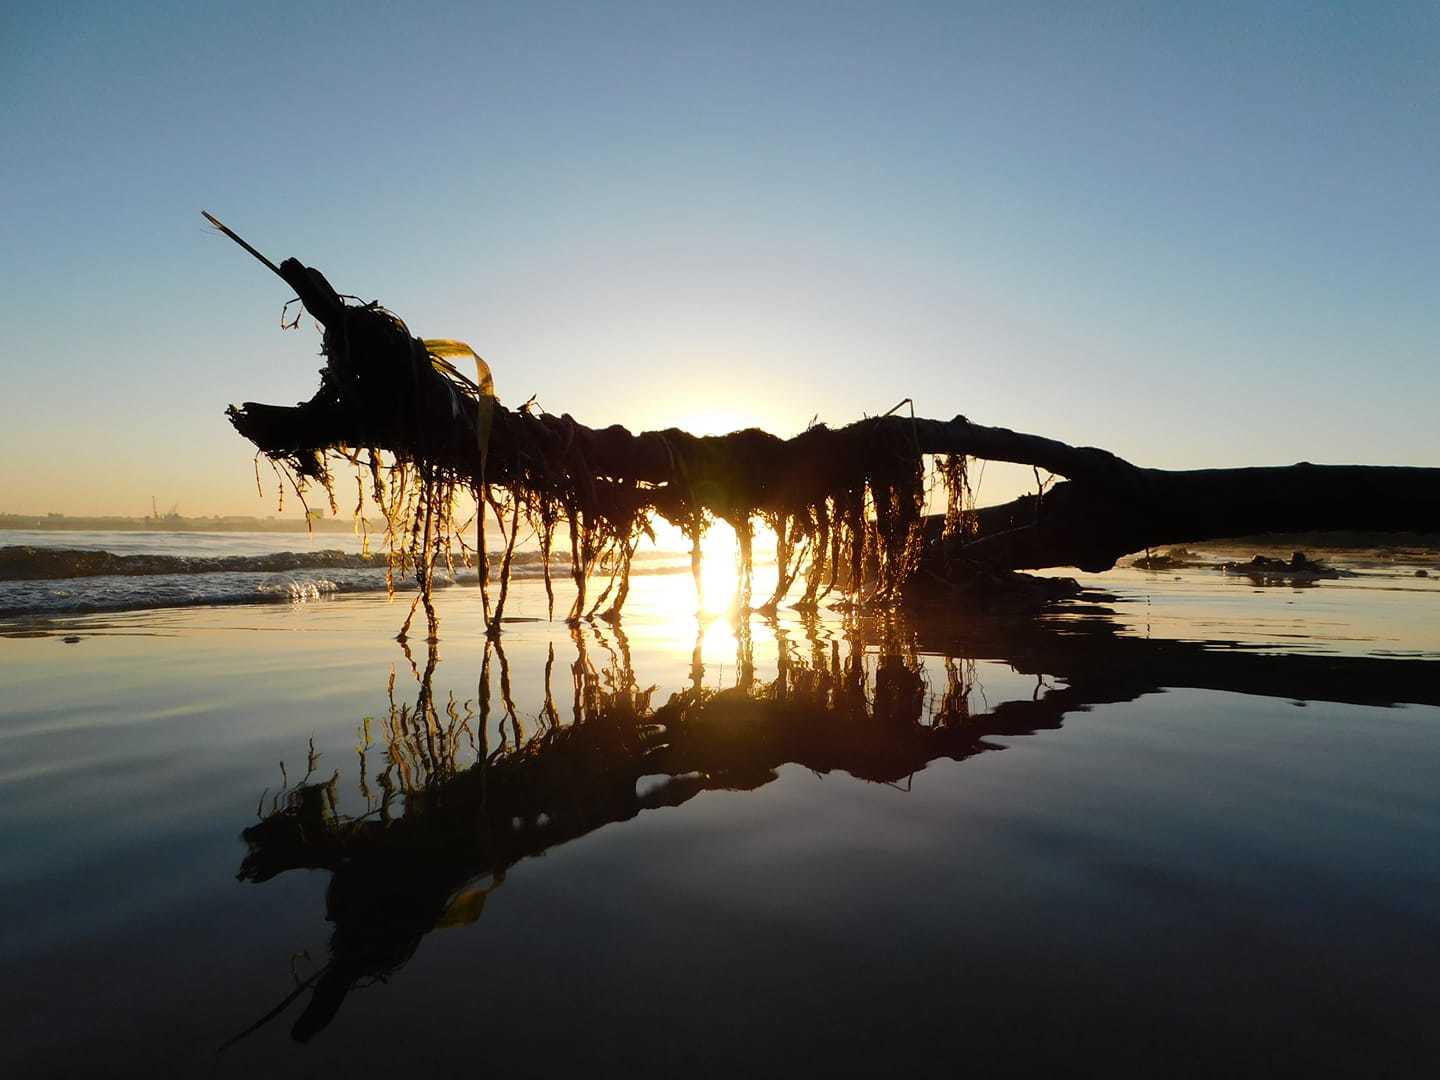 Old driftwood at the start of a new day by Nicola Jayne